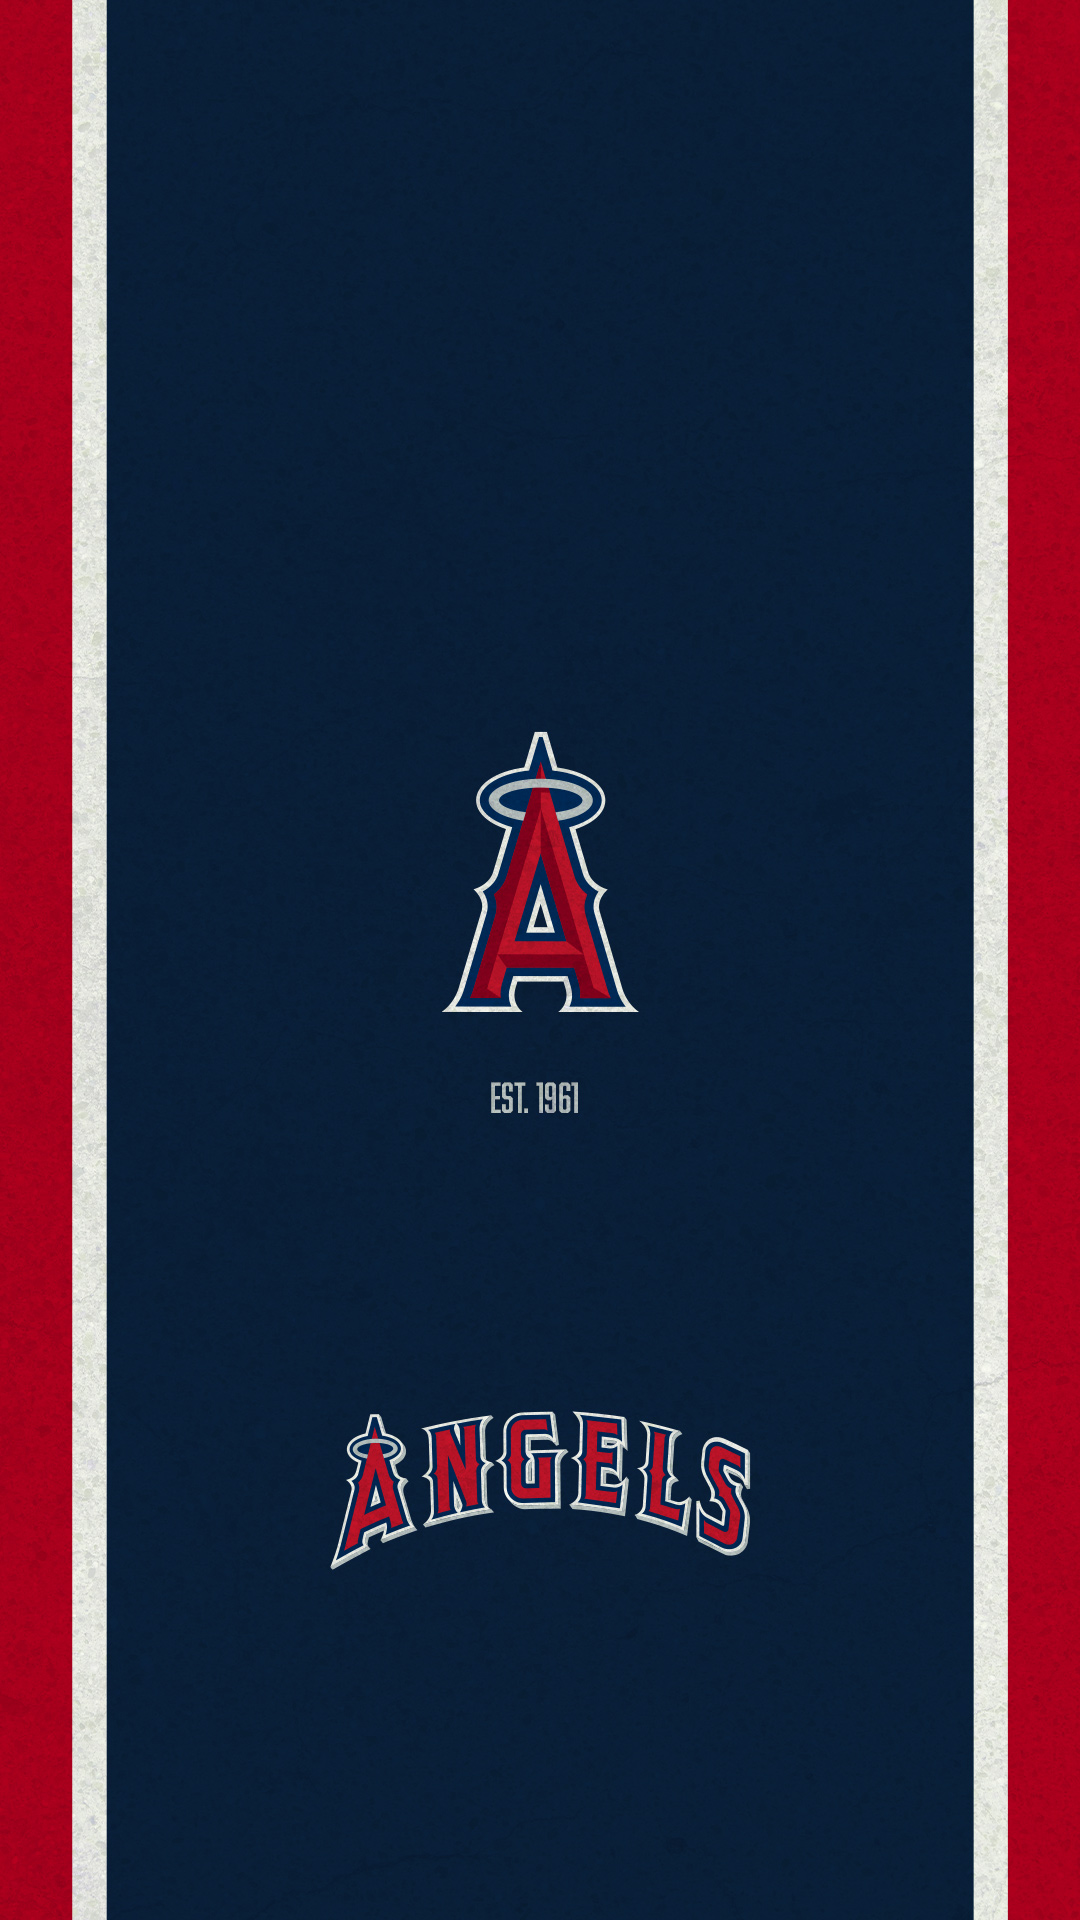 Los Angeles Angels on X Host the coast on your phone   WallpaperWednesday x Oggis httpstcoChOXtohzQ9  X